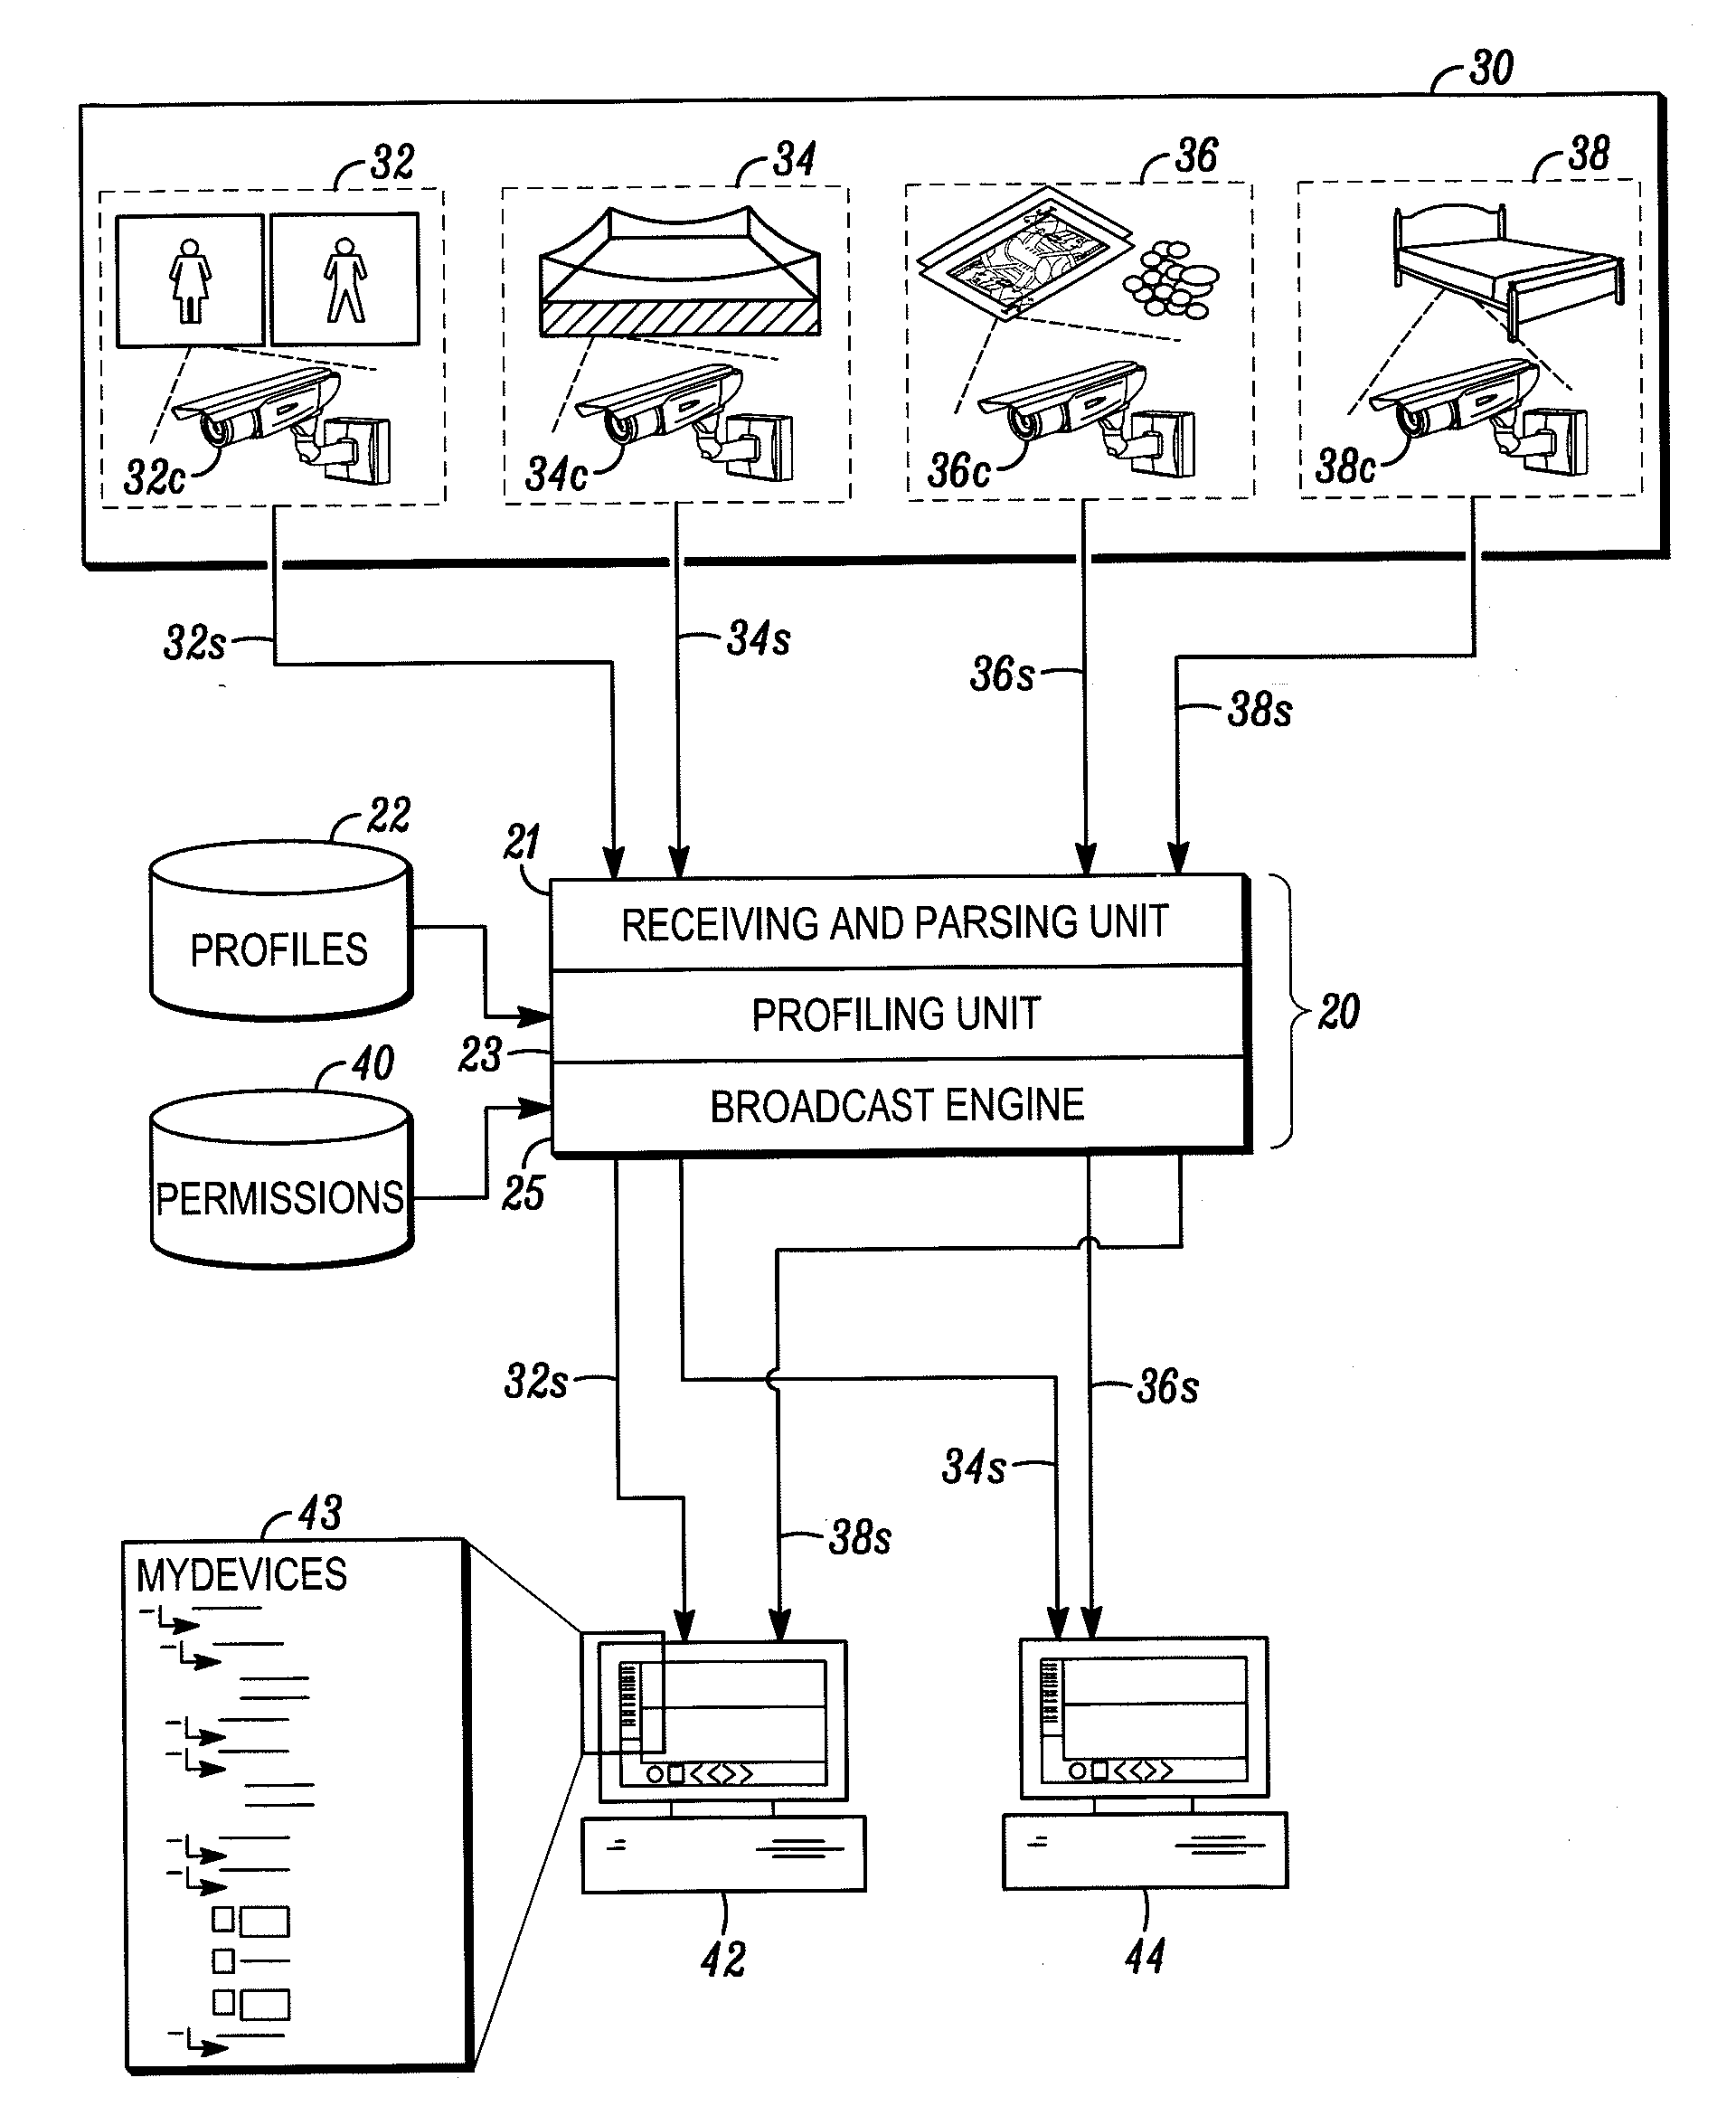 Operator device profiles in a surveillance system